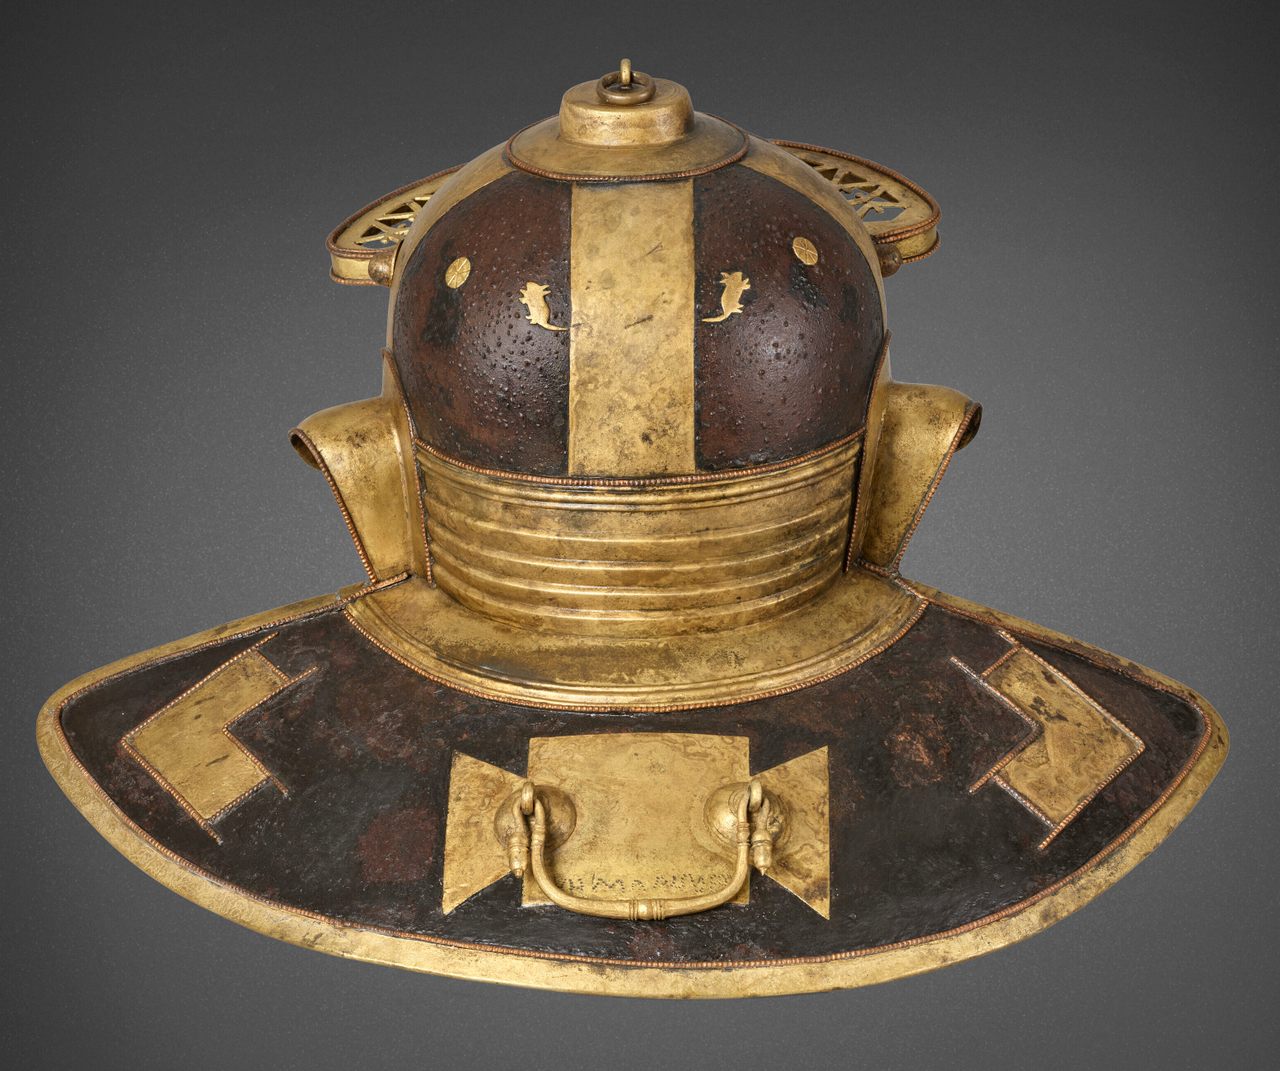 The ornate Guttmann Mouse Helmet, seen from the rear, includes depictions of what scholars believe are two mice and loaves of bread. 